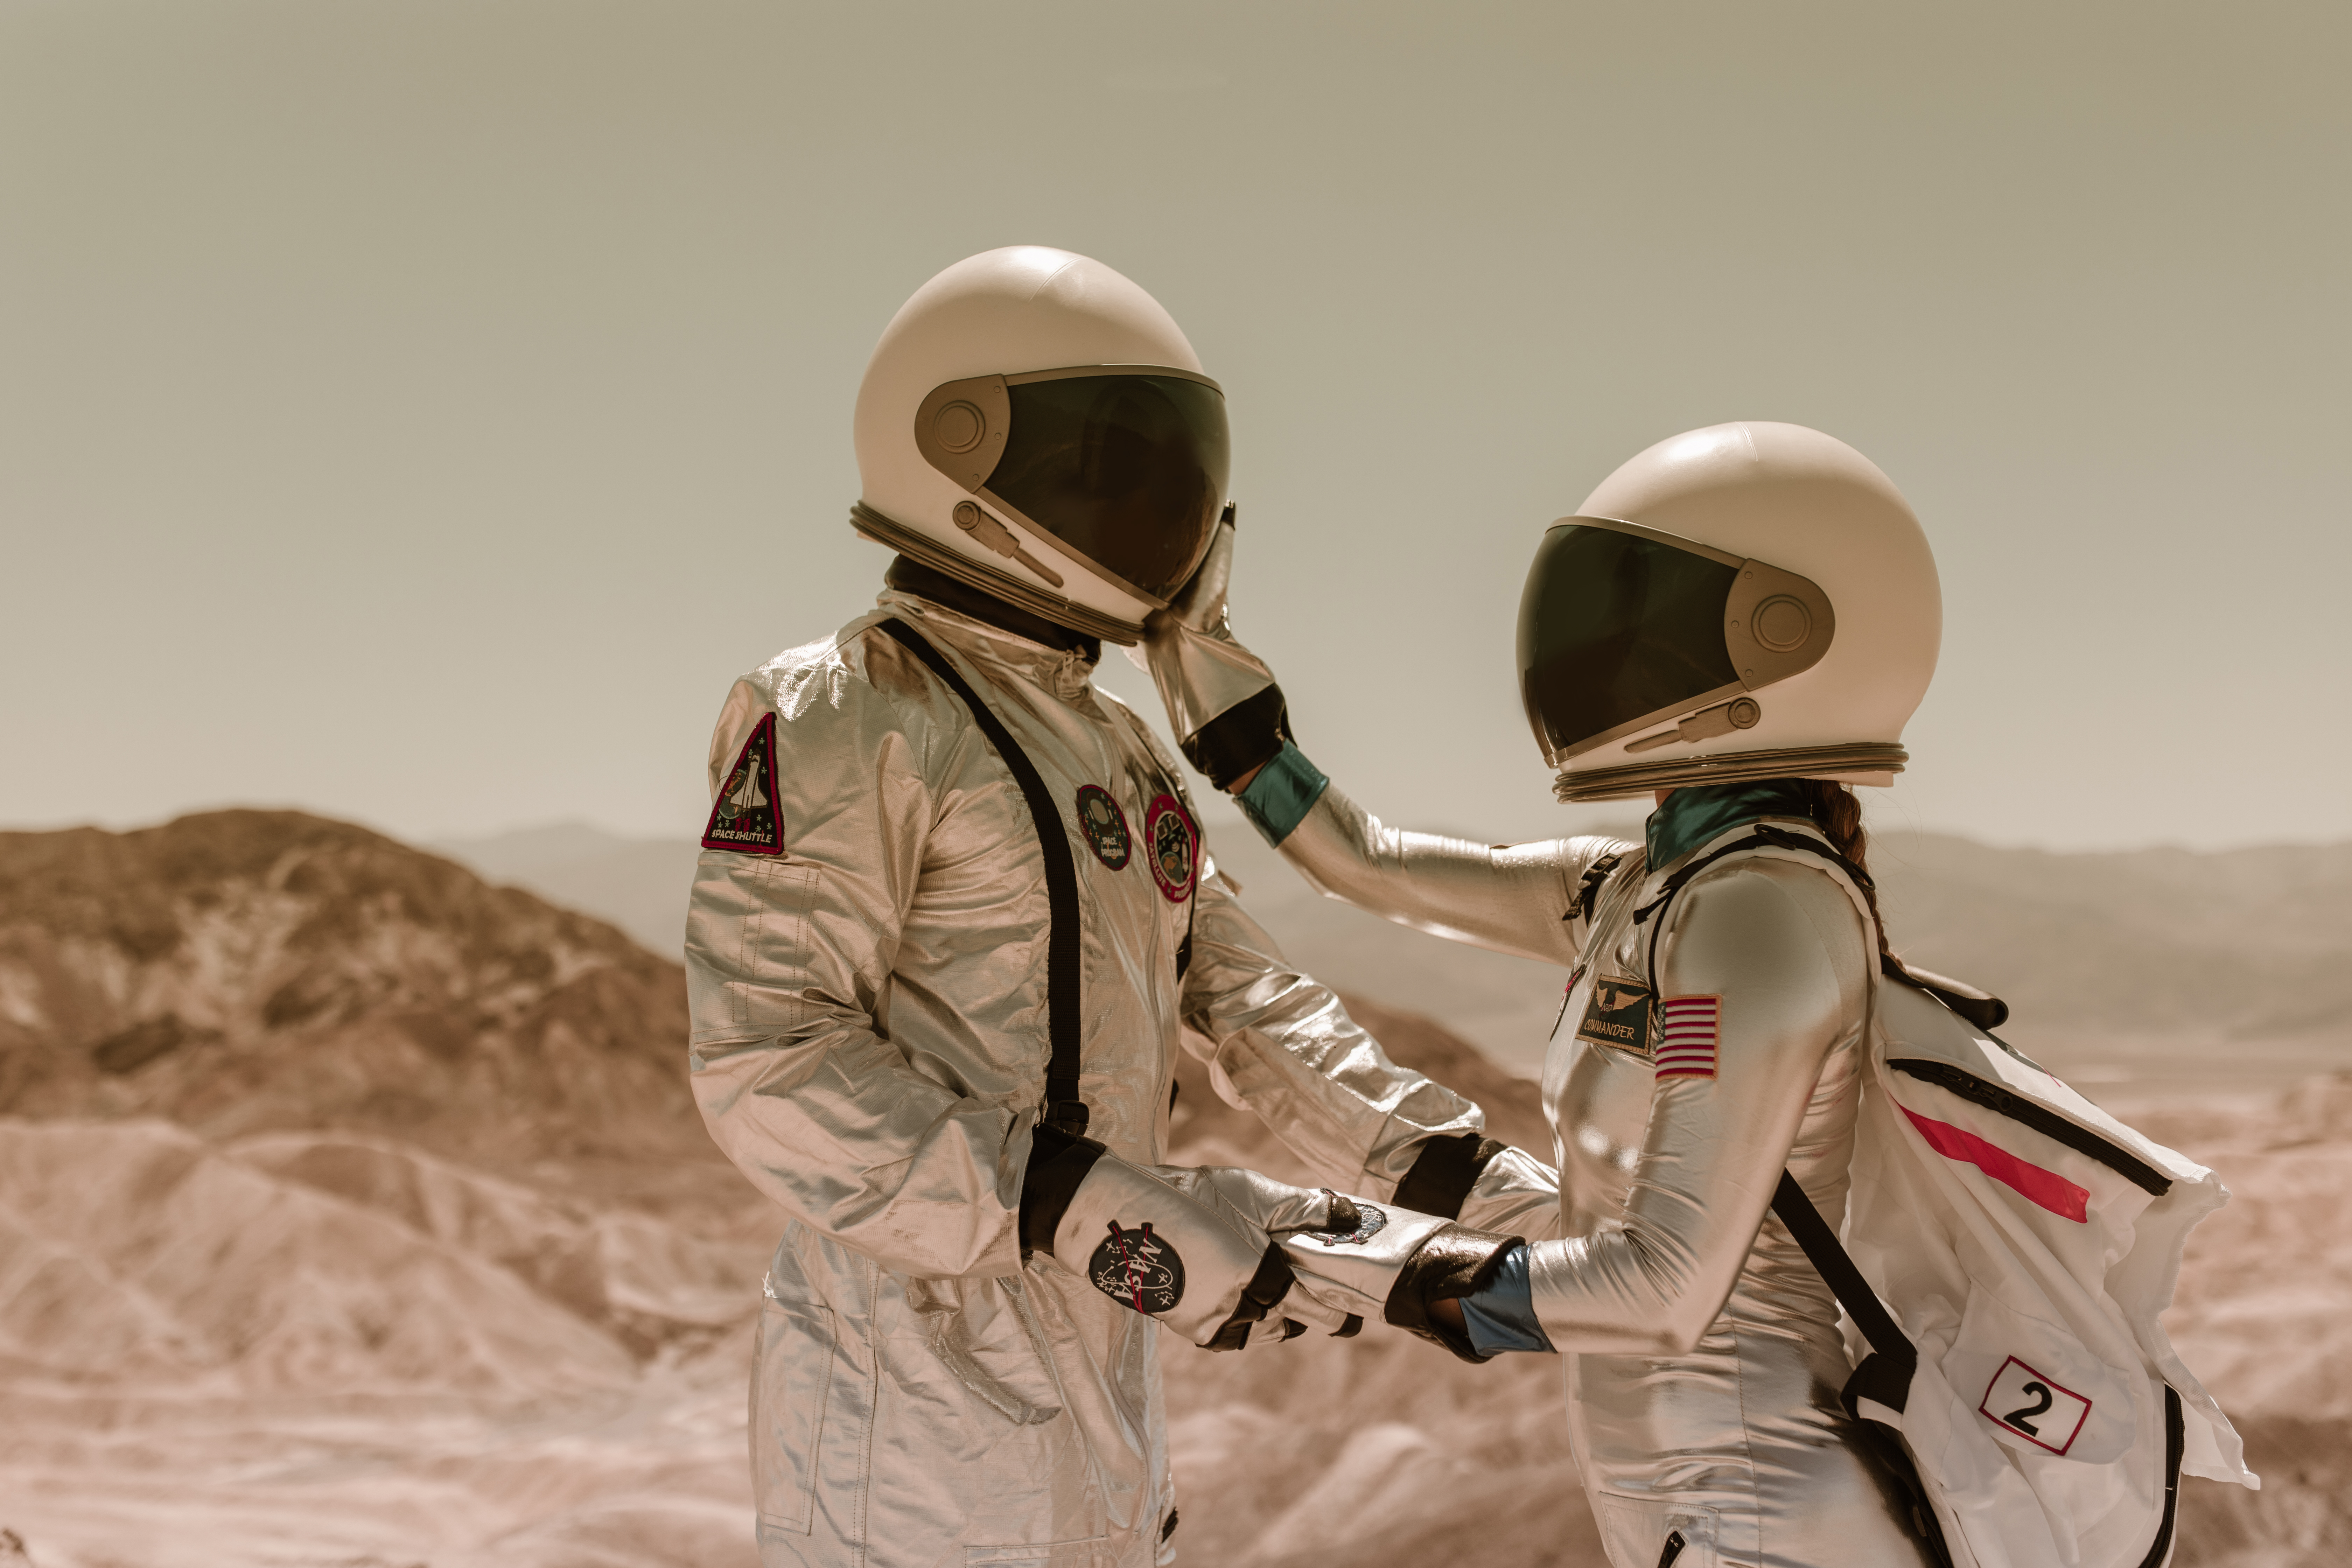 Astronaut Couple Wallpapers